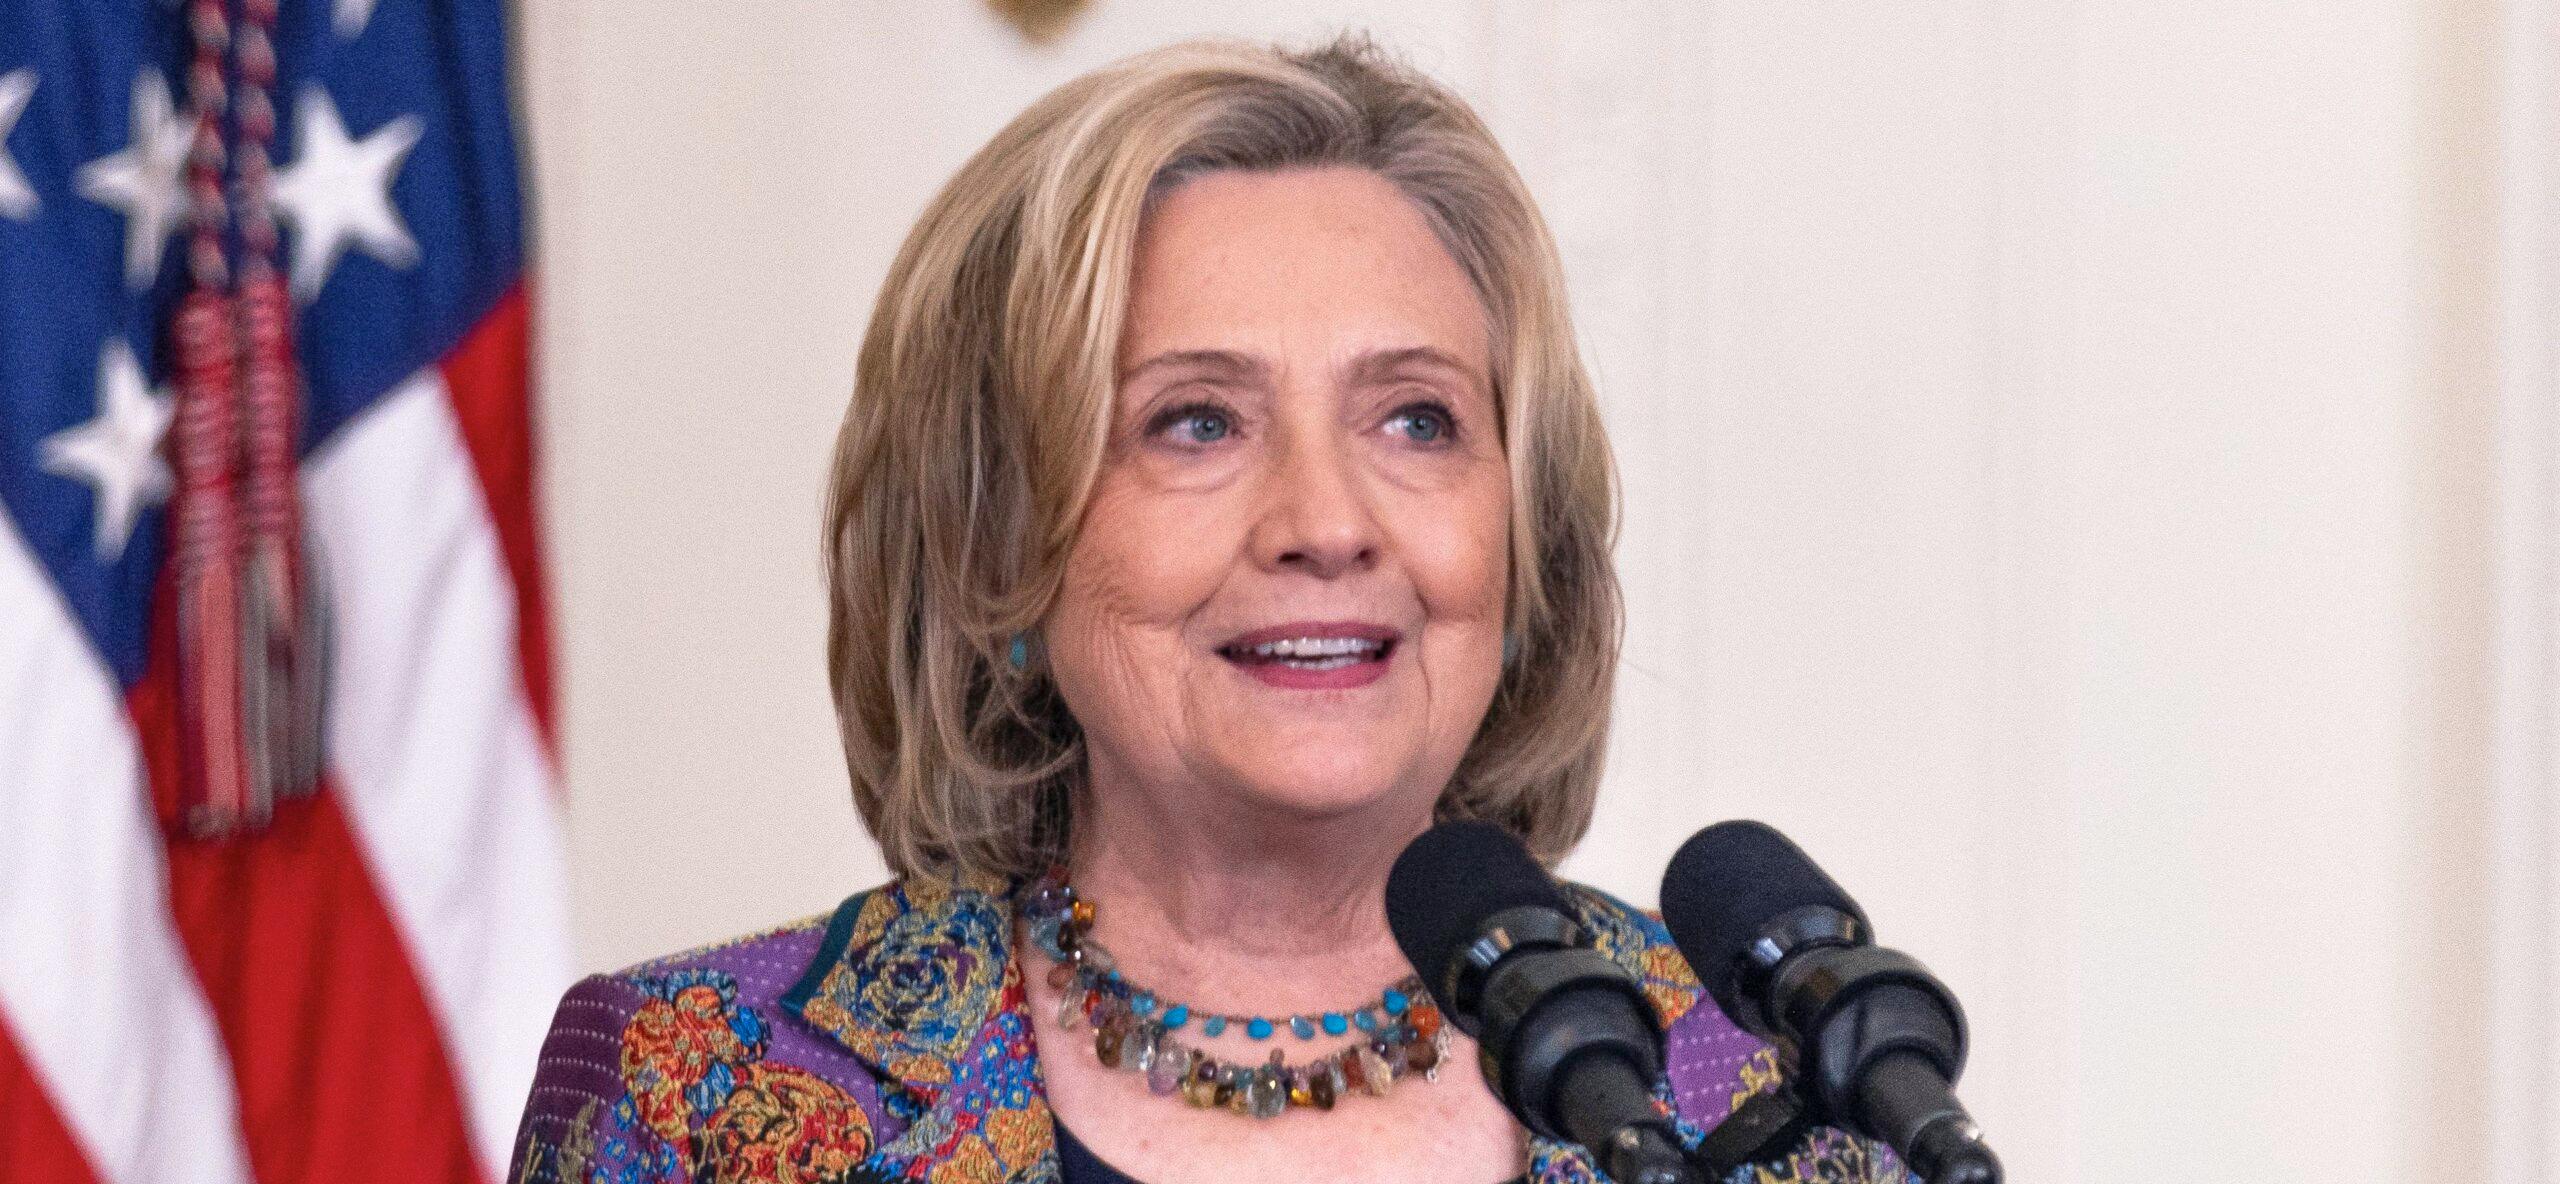 Hillary Clinton Shares Throwback Hairstyle Picture: ‘In My Bob Era’ [PHOTO]